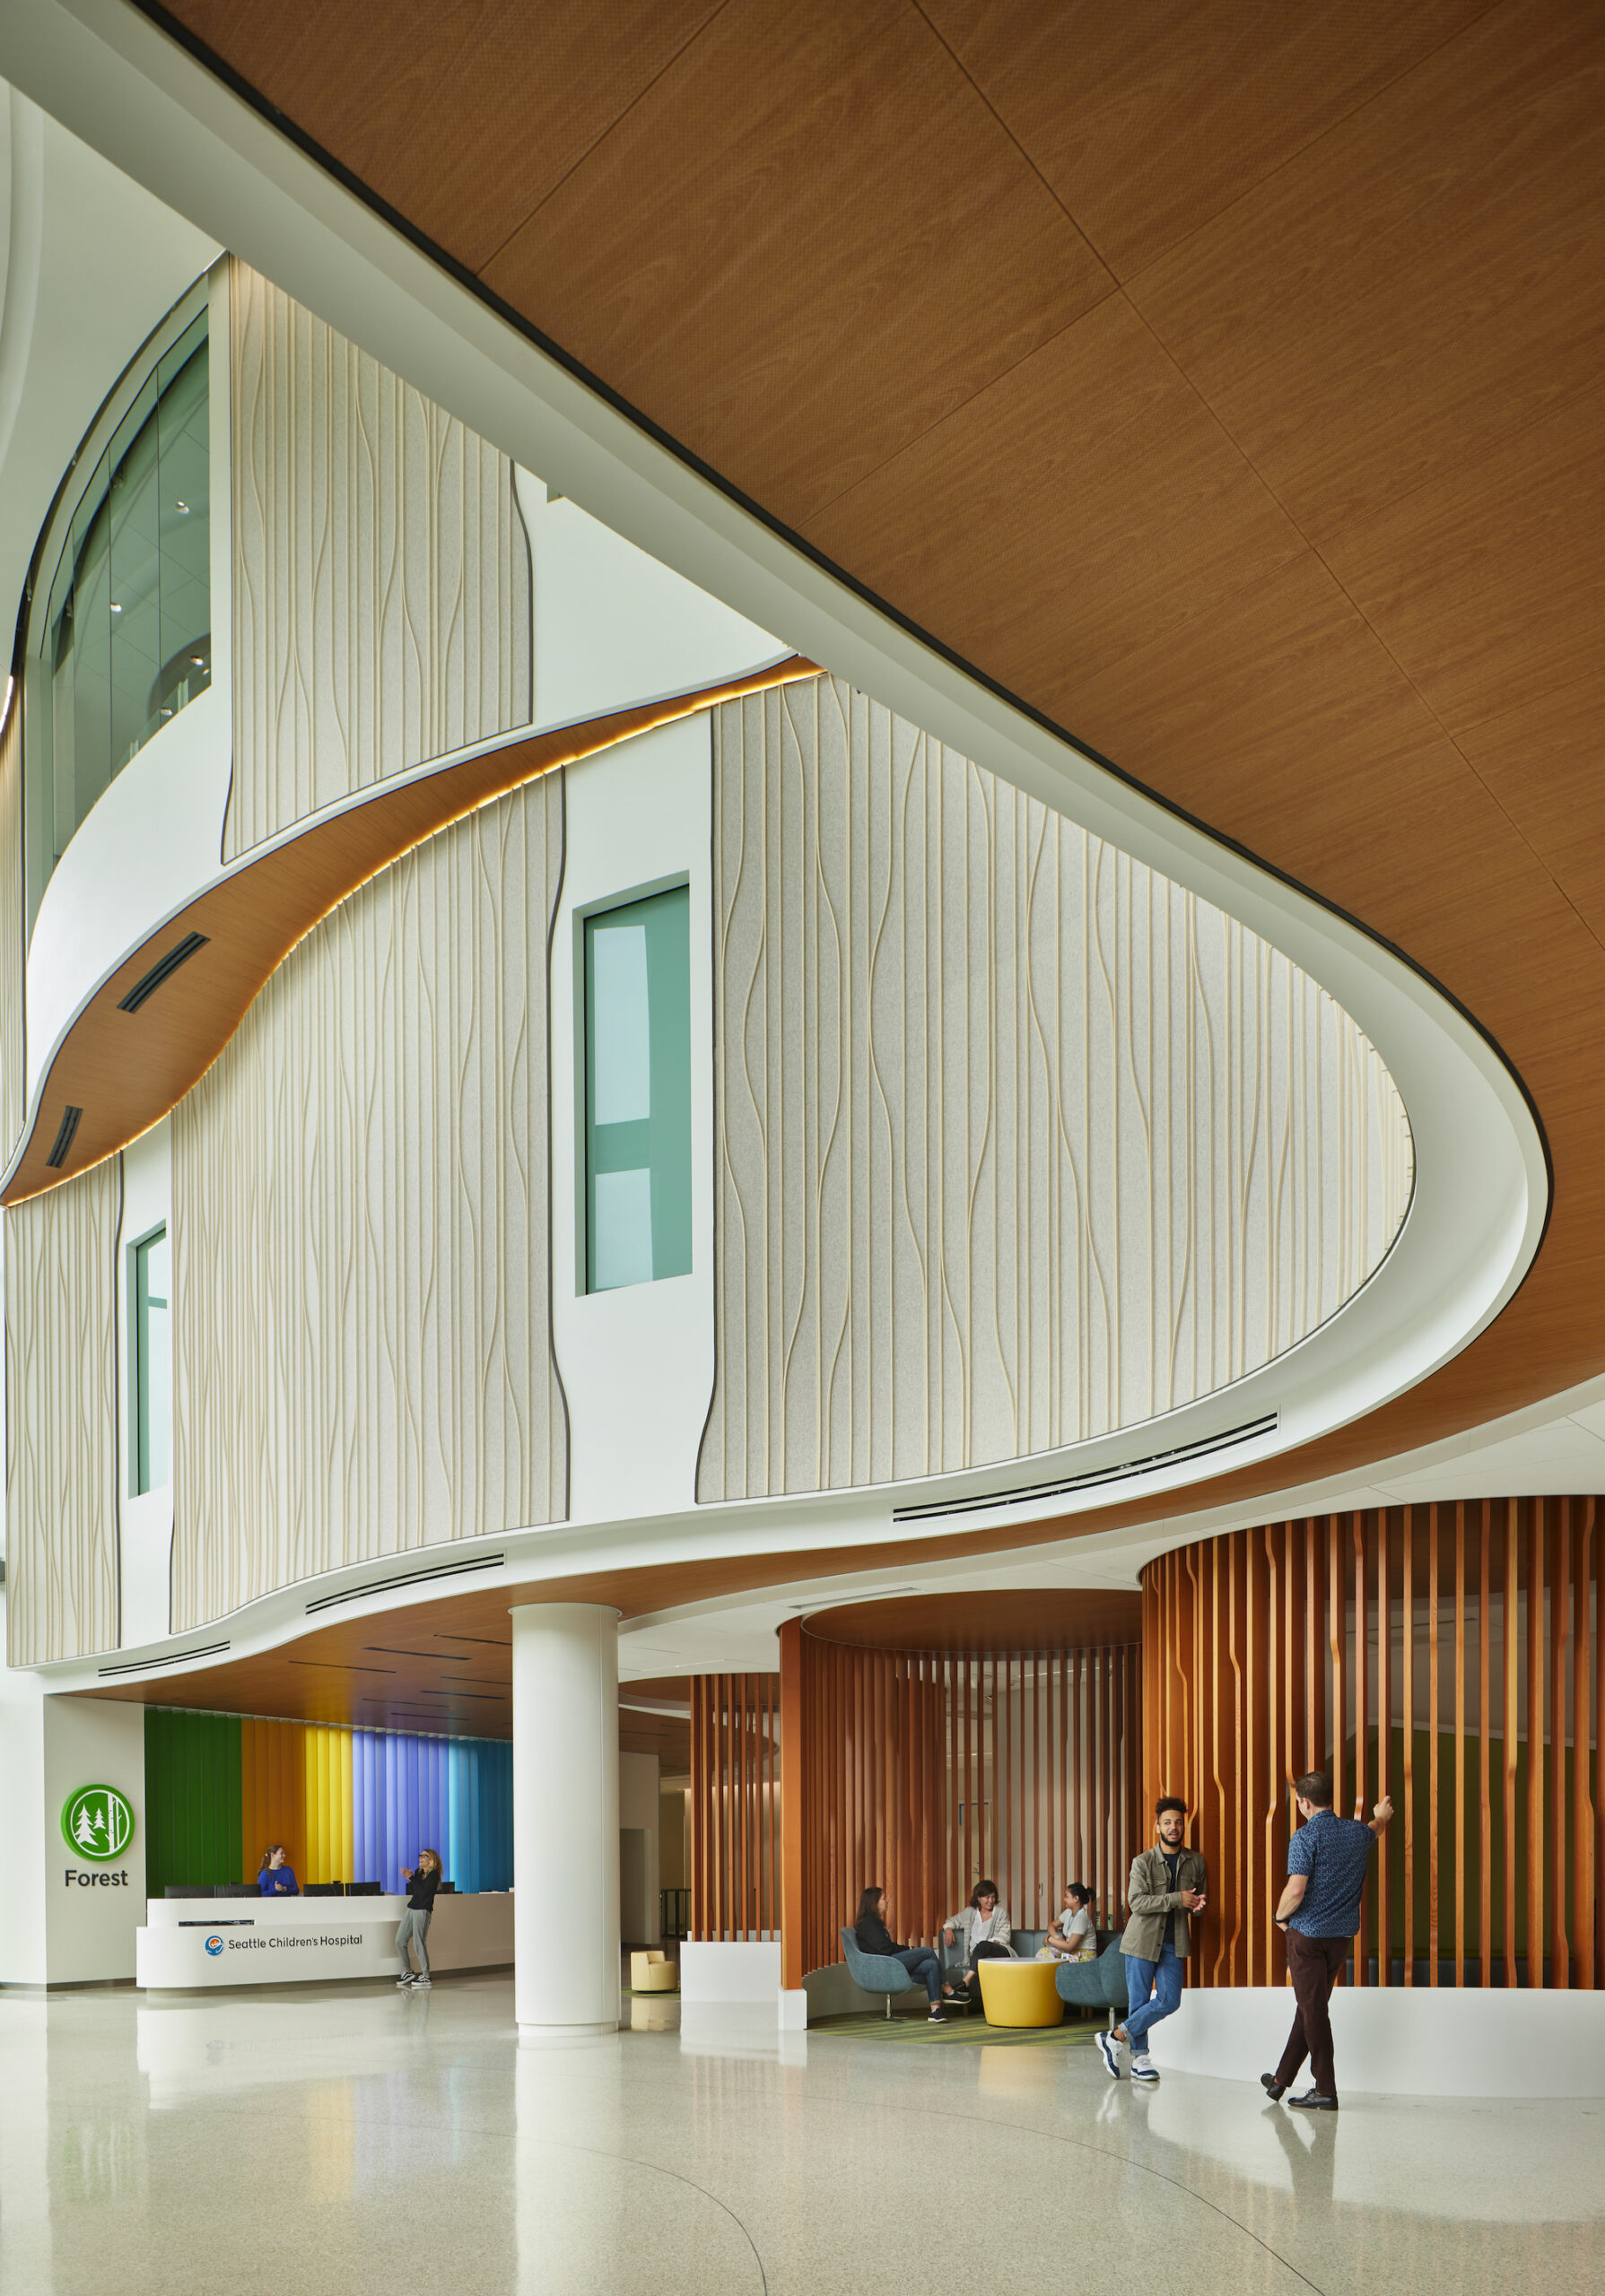 The tall lobby of a hospital. The second and third stories have curved walls covered in a white tan detailed felt wall covering